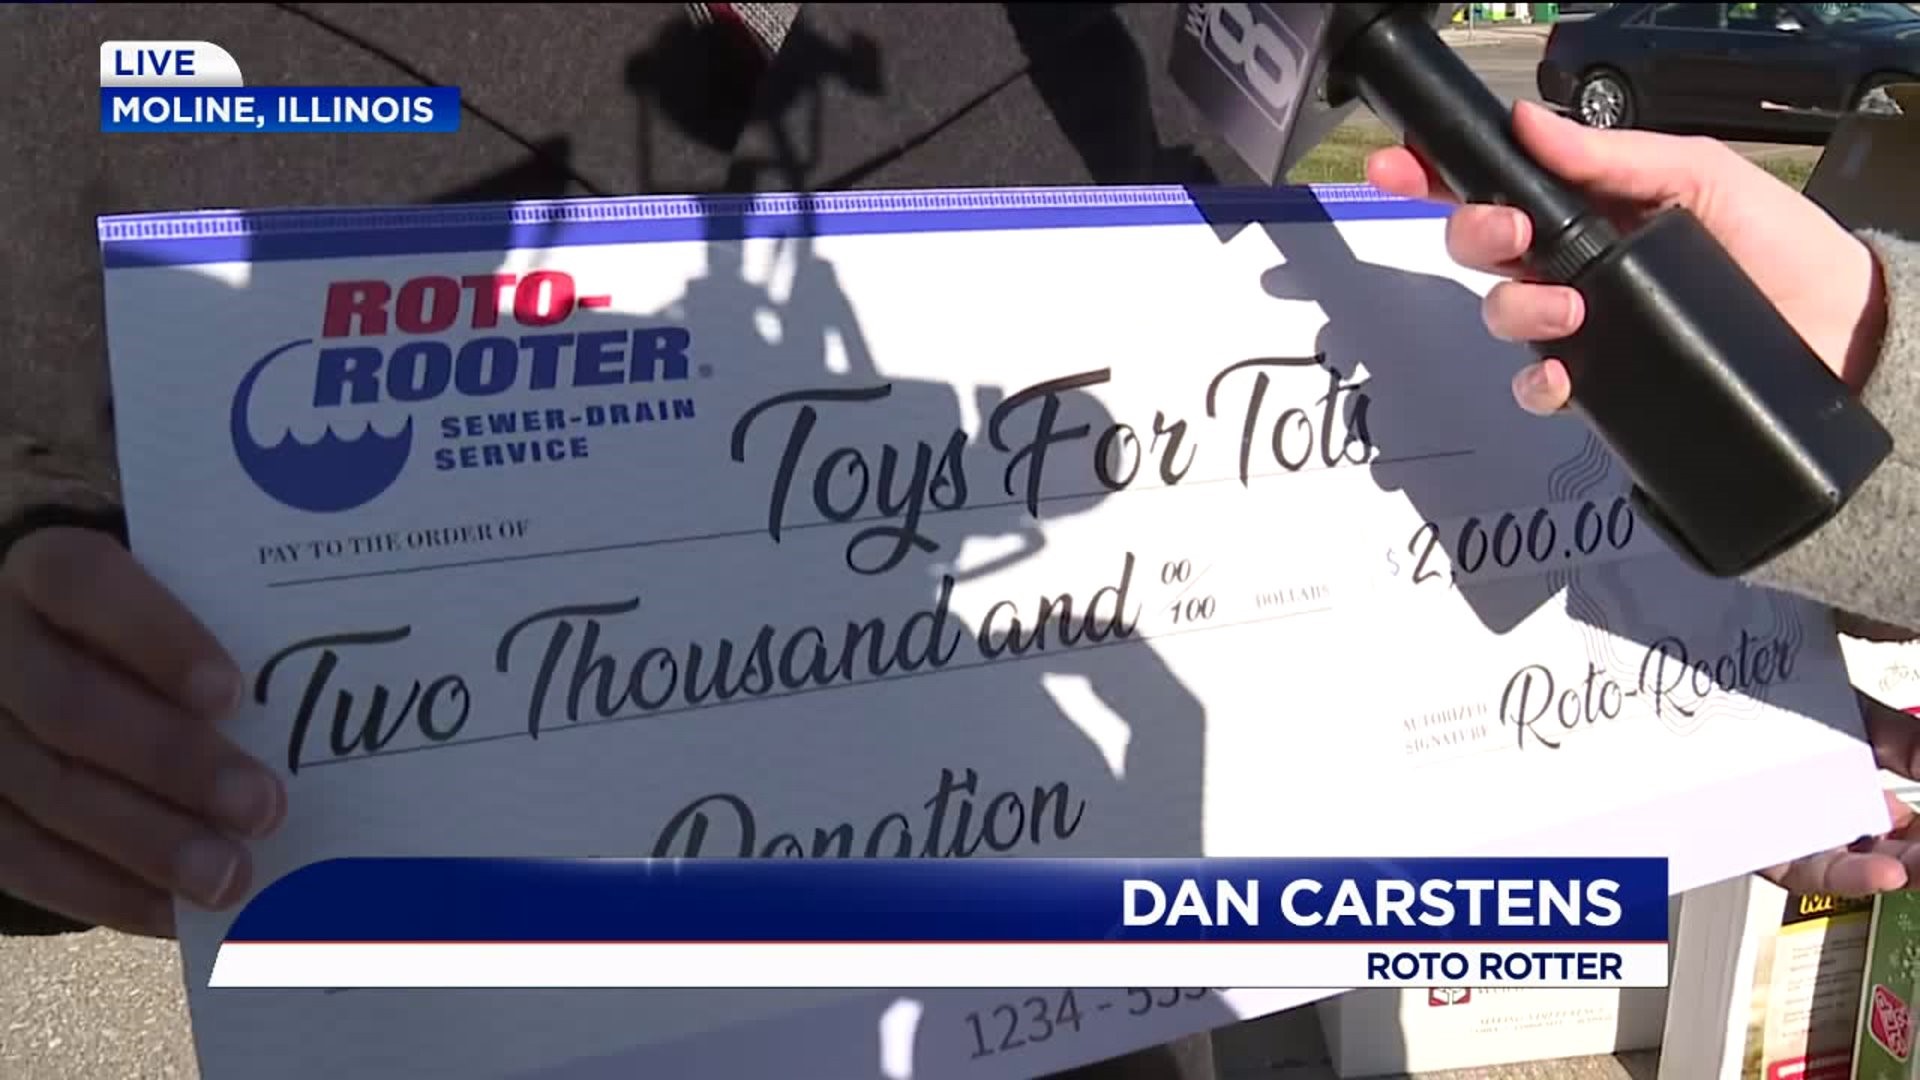 Toys for Tots - Roto Rooter